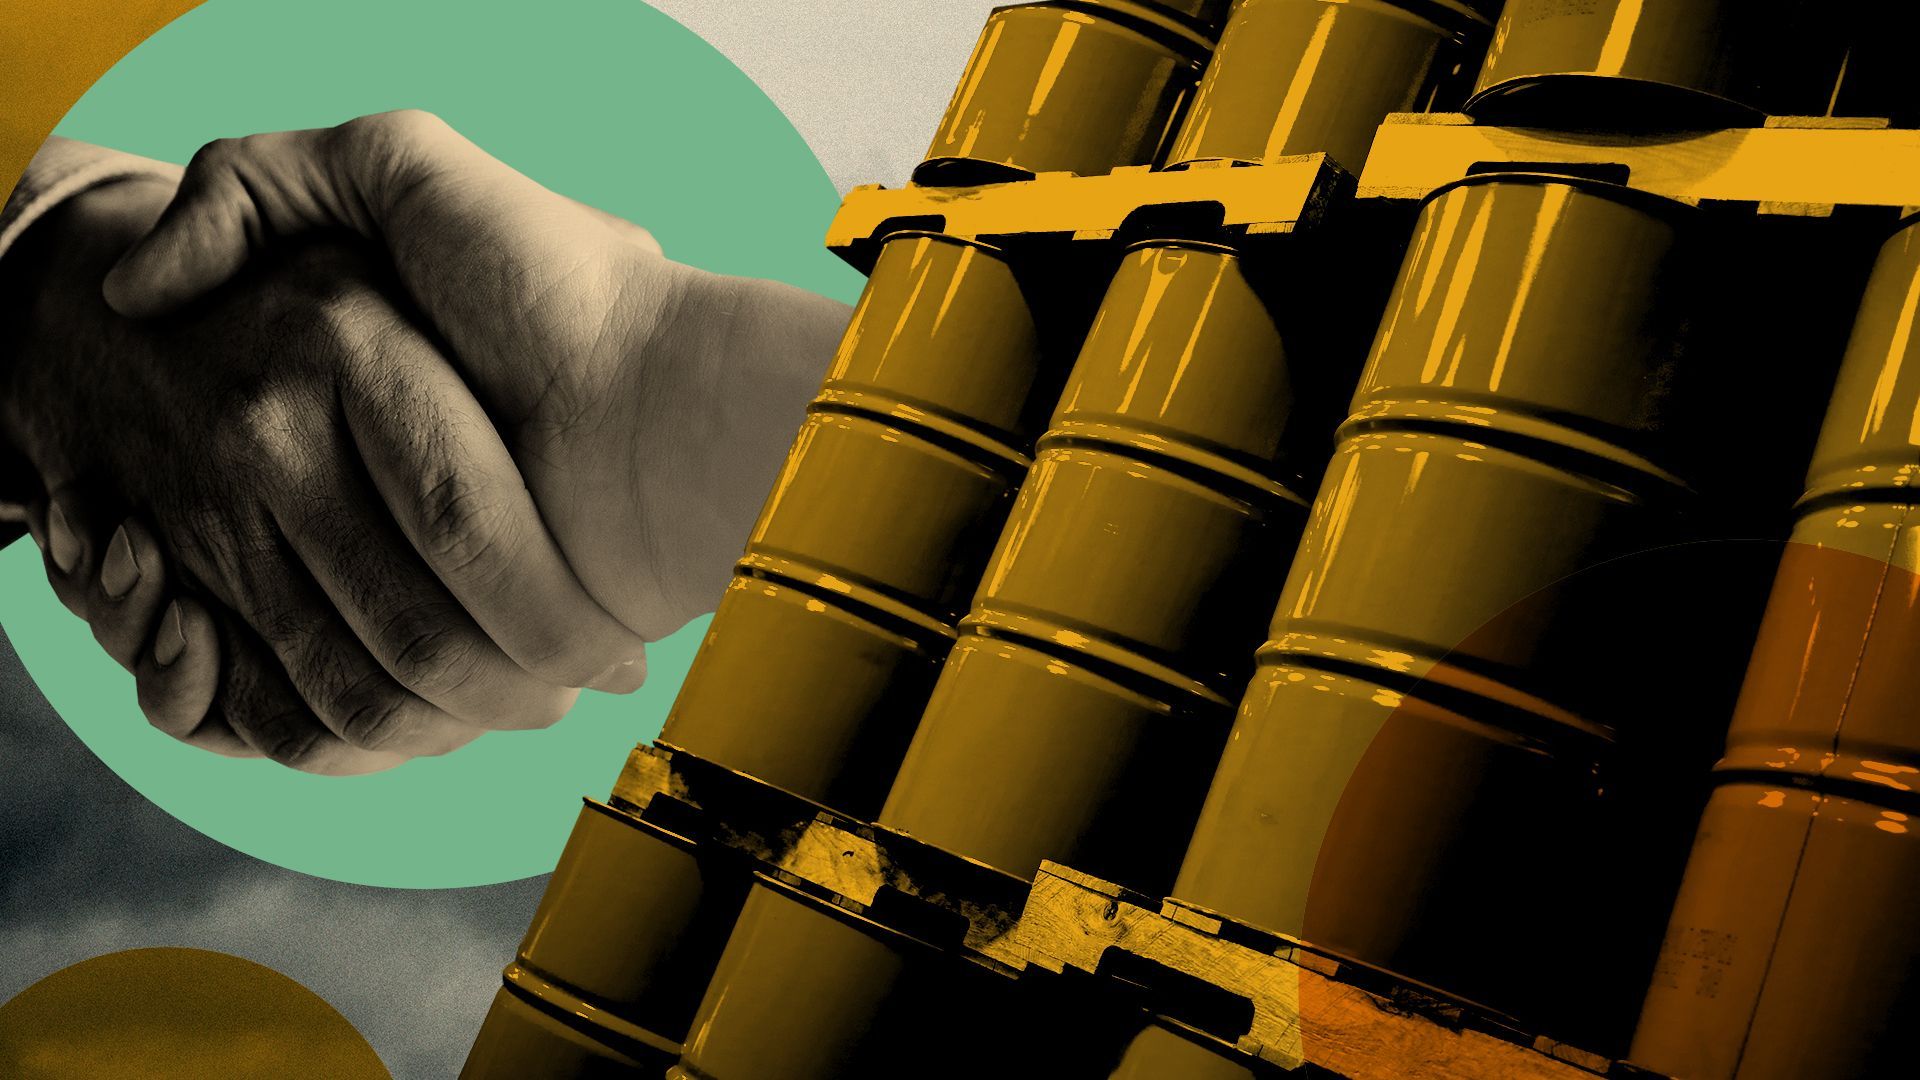 Illustration of a handshake in a graphic circle next to stacks of oil barrels